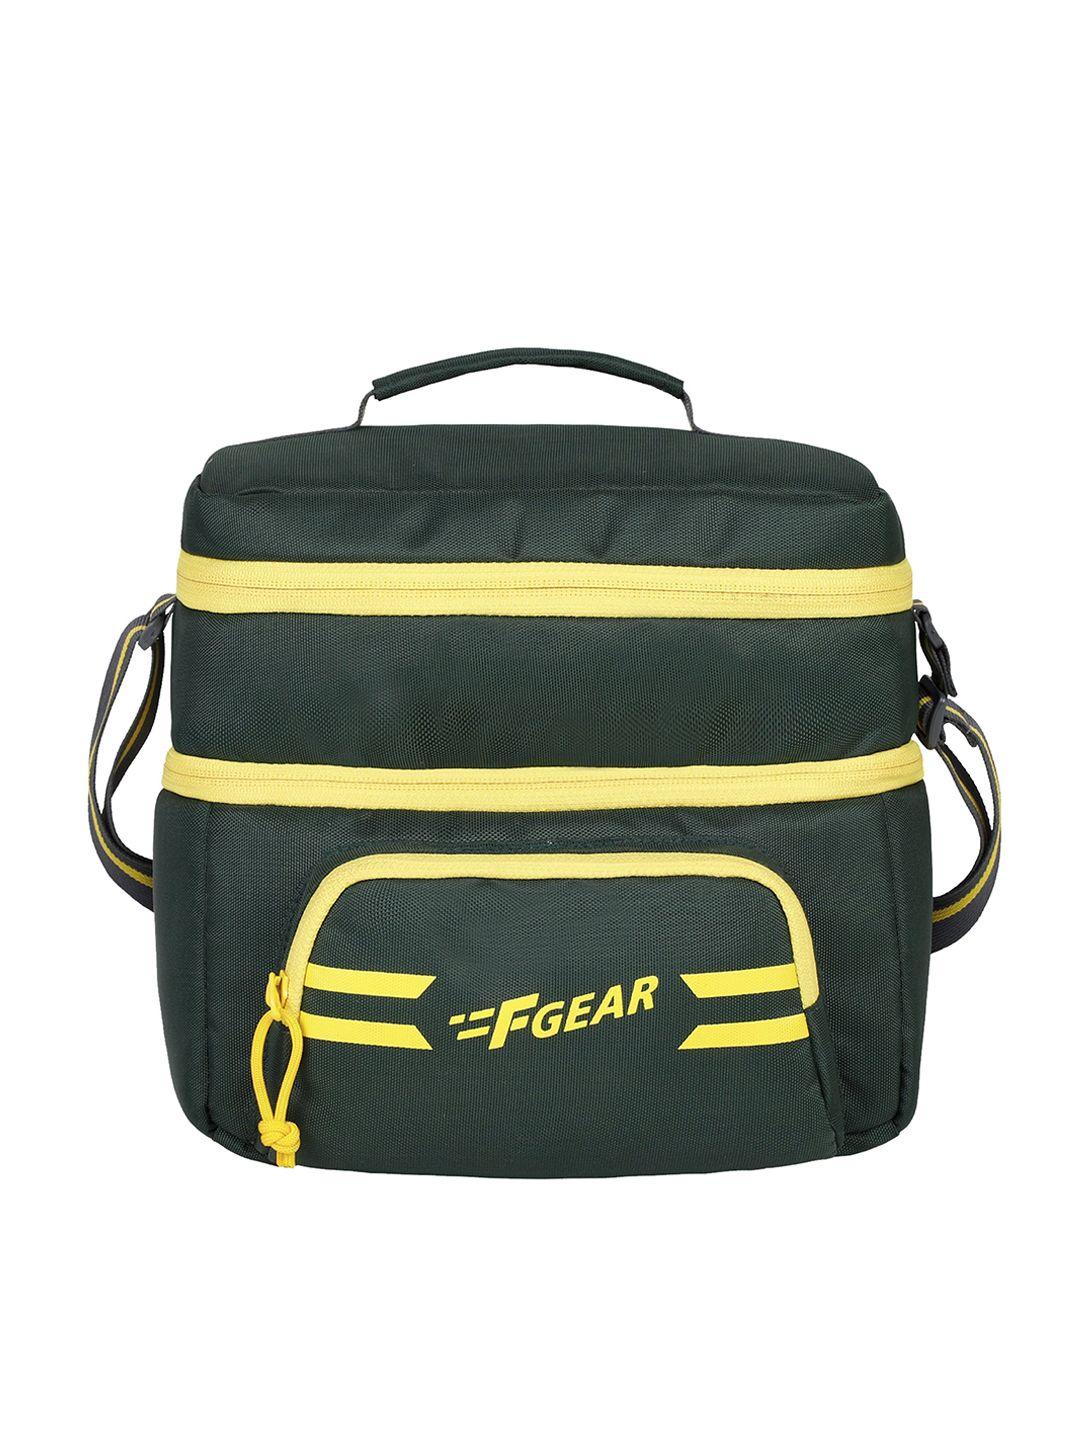 f gear 3-compartment lunch bag